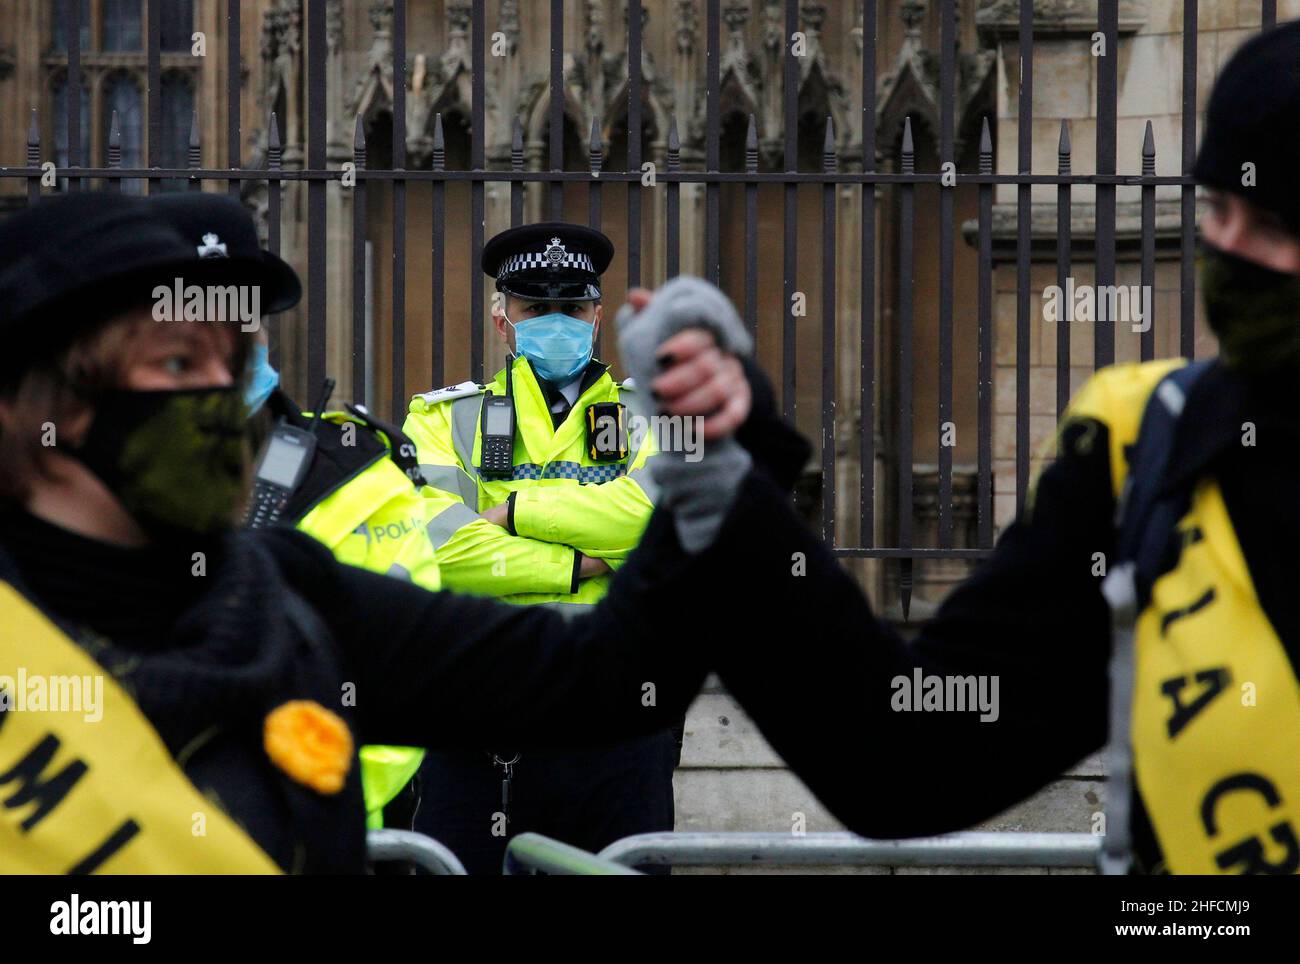 A group of women protest outside parliament as part ofthe Kill The Bill movement. Police guarding parliament look past the protesters. London, January 15th 2021. Anna Hatfield/Pathos Stock Photo